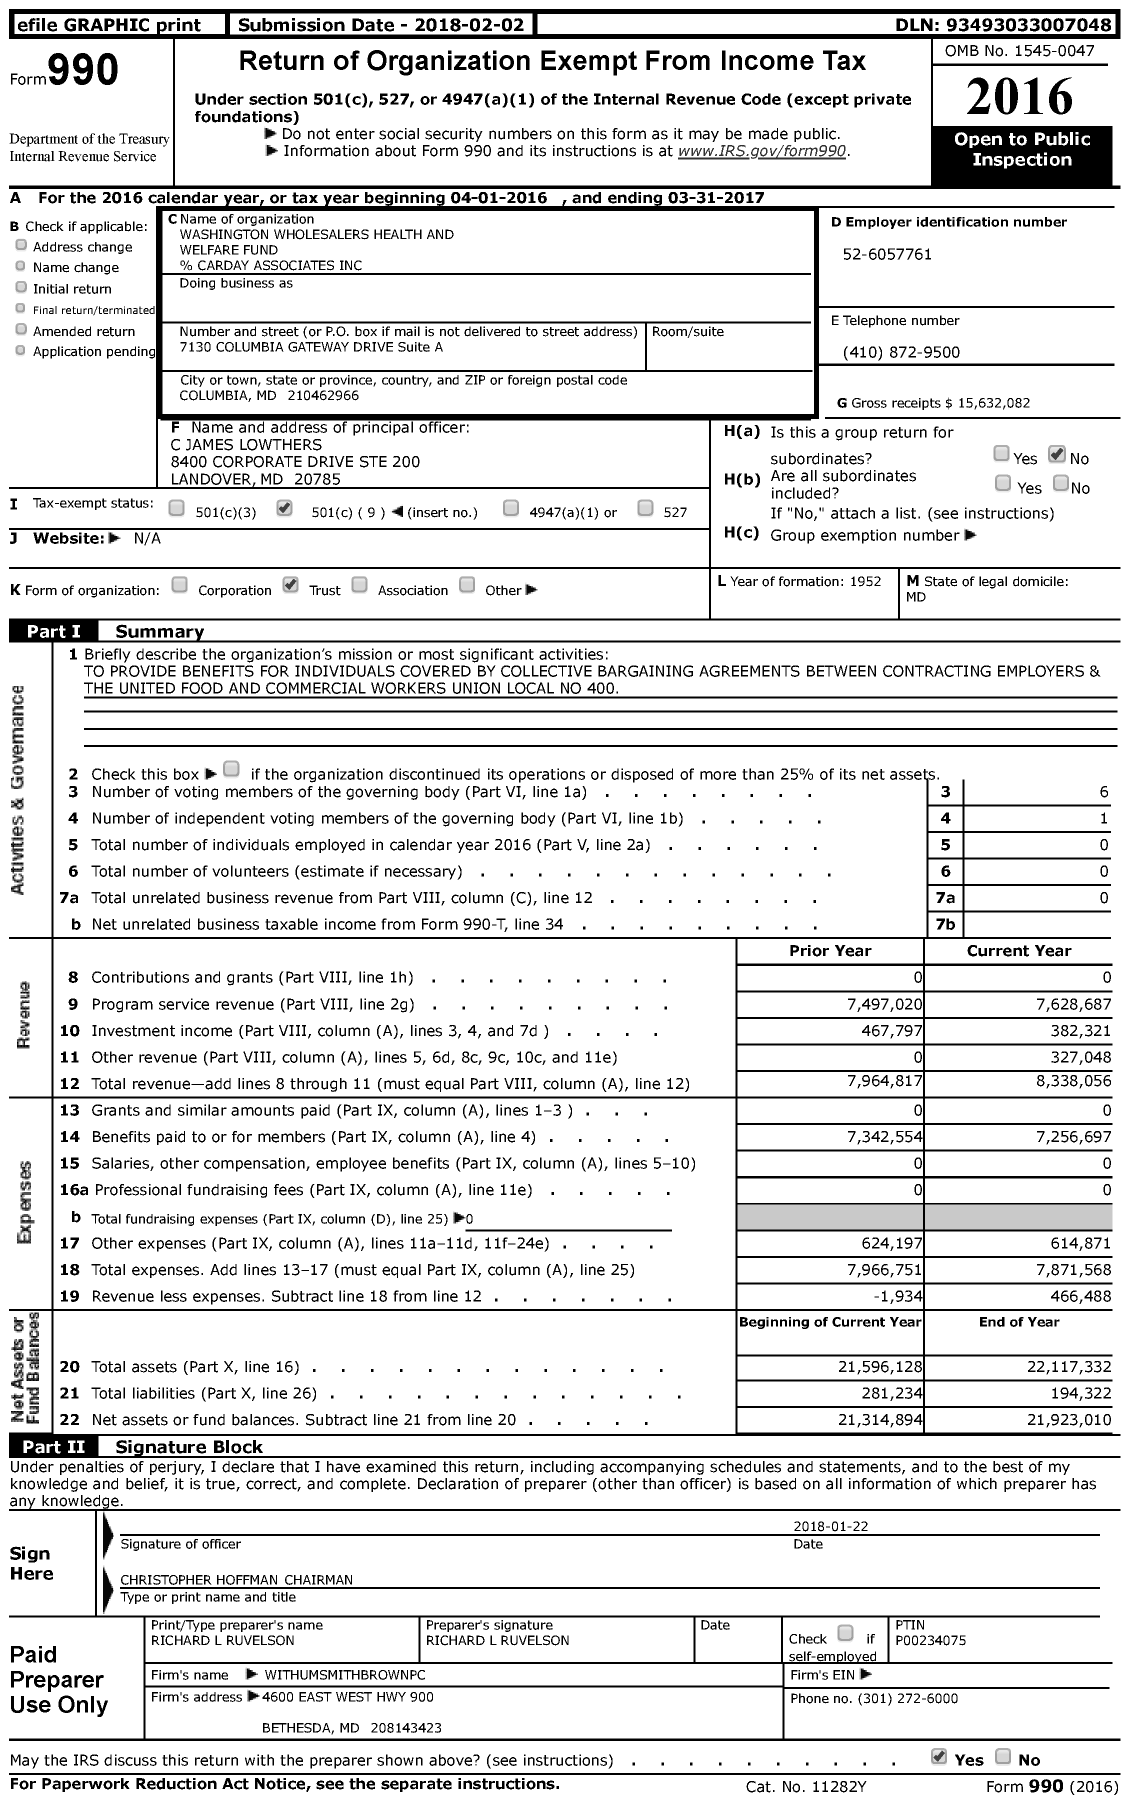 Image of first page of 2016 Form 990 for Washington Wholesalers Health and Welfare Fund